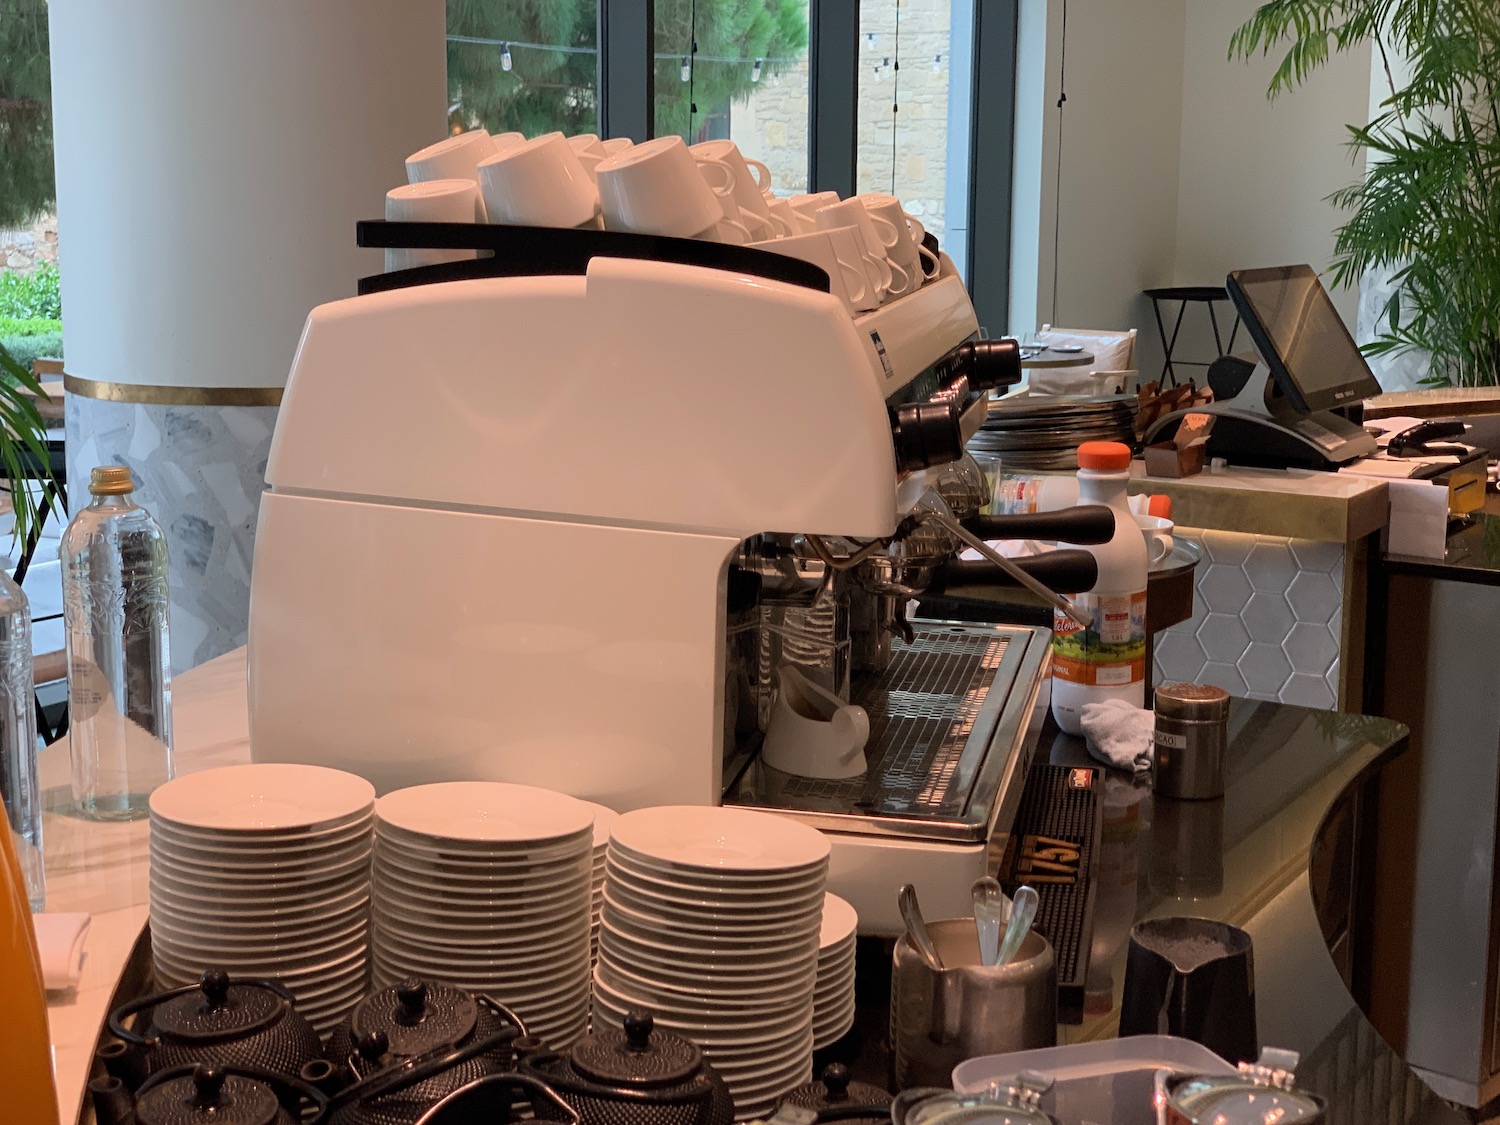 a coffee machine with a stack of plates